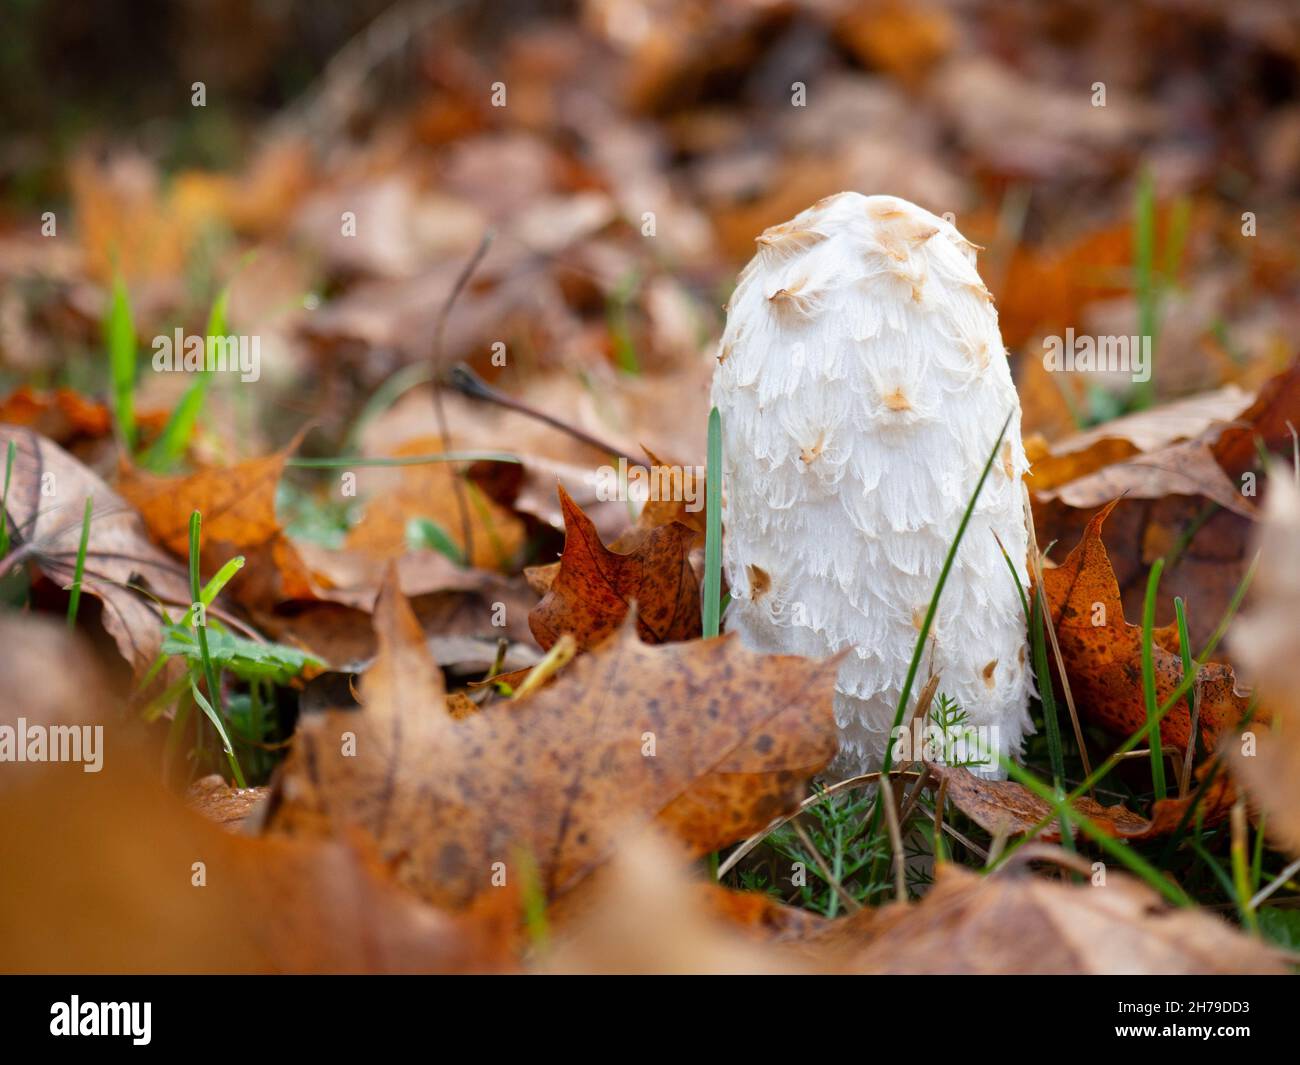 Coprinus comatus, the shaggy ink cap, among fallen red leaves Stock Photo